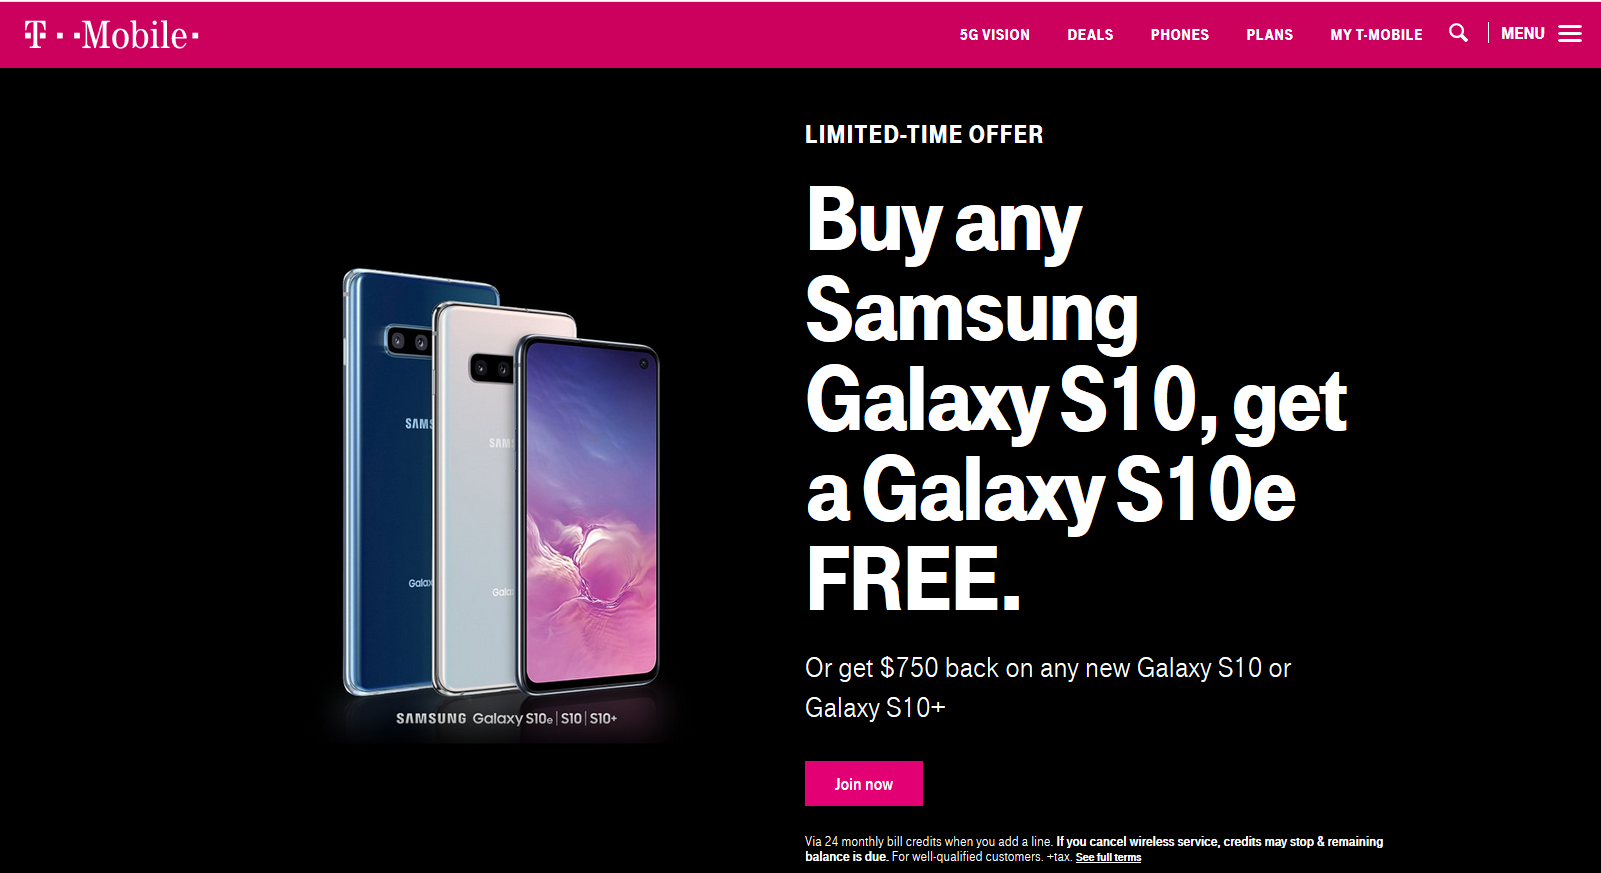 how tmobile makes money from 1 phone free offer